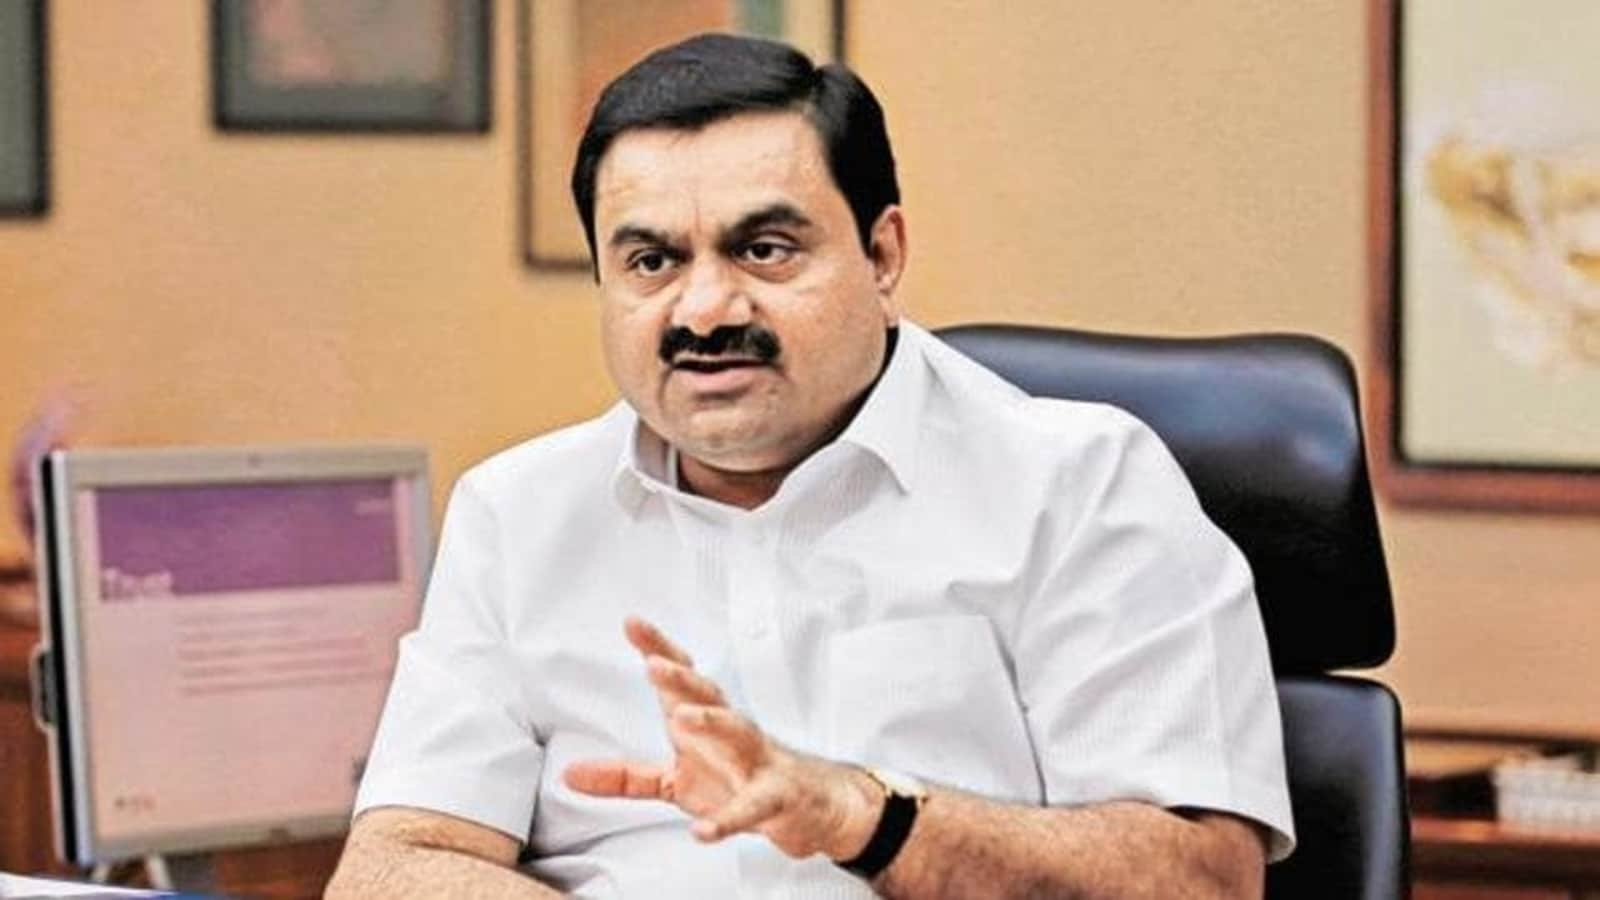 Billionaire Gautam Adani lost more money this week than anyone else in the world